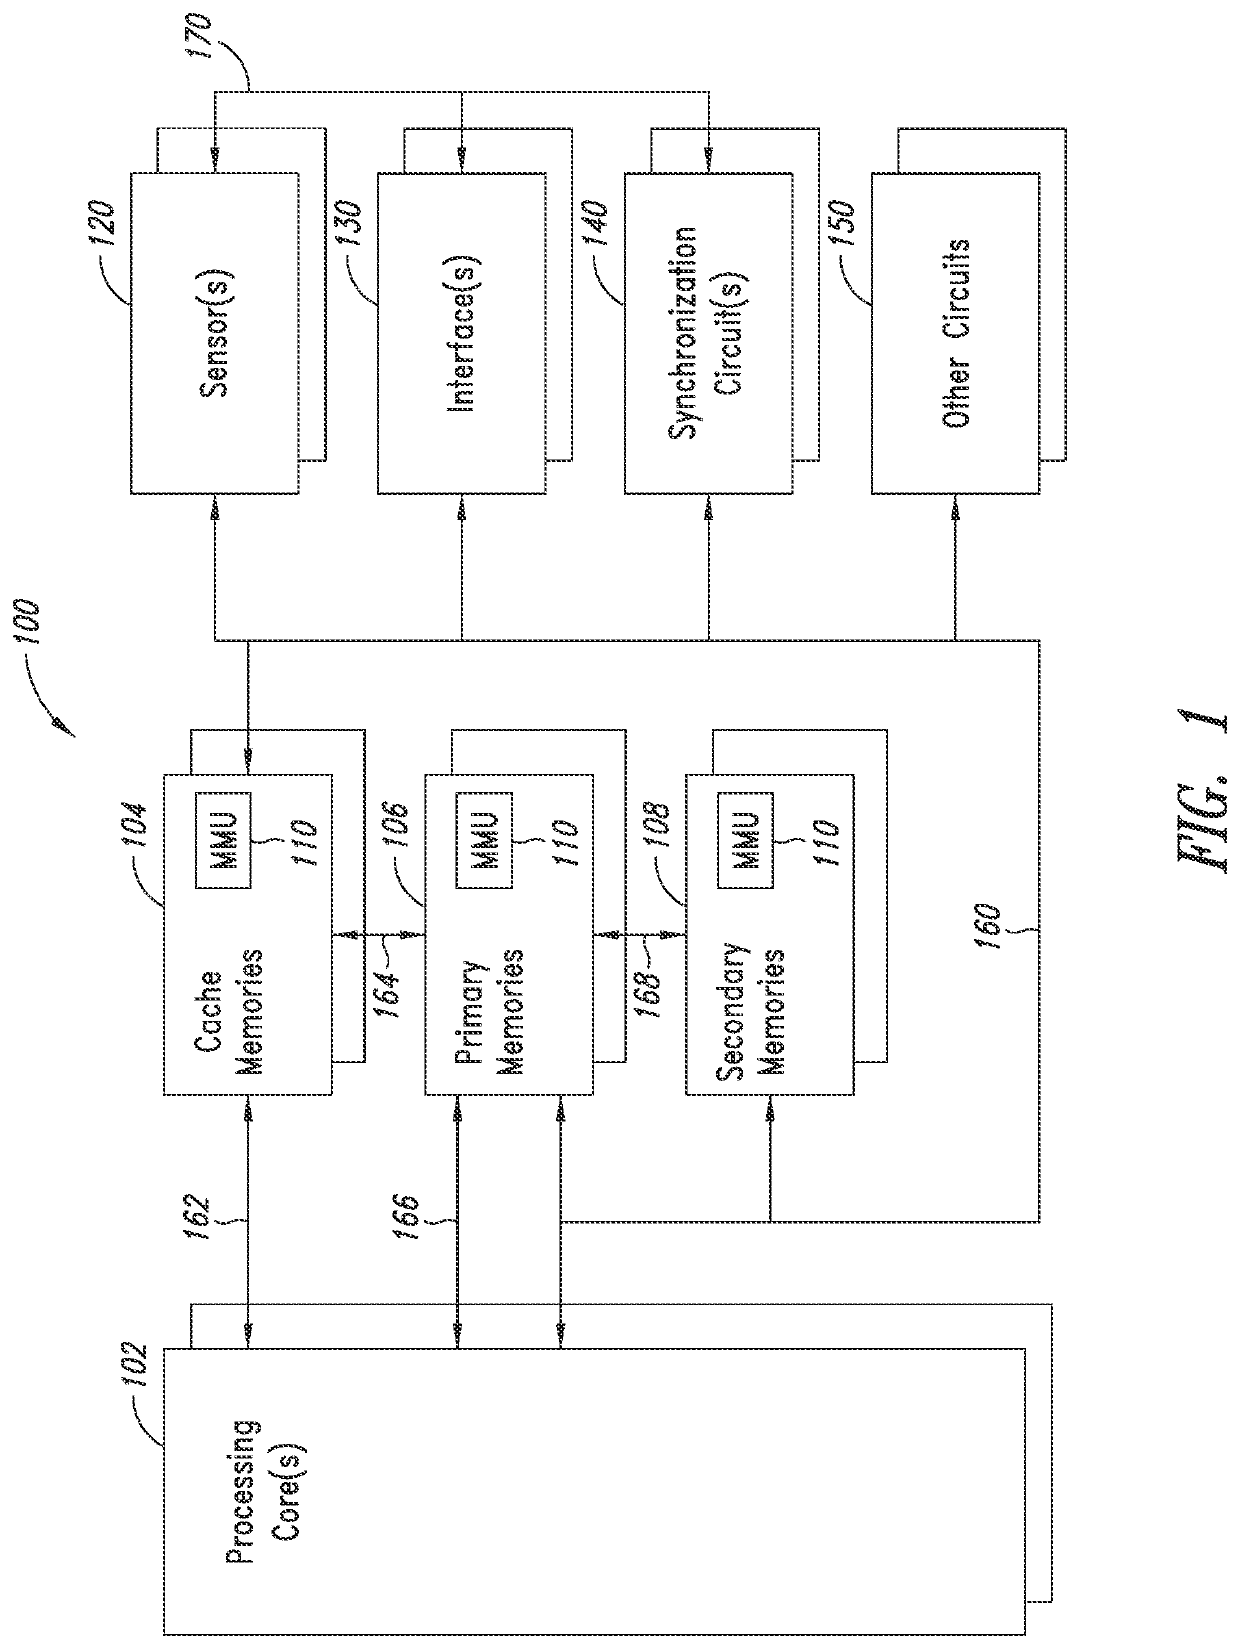 Device, system and method for synchronizing of data from multiple sensors